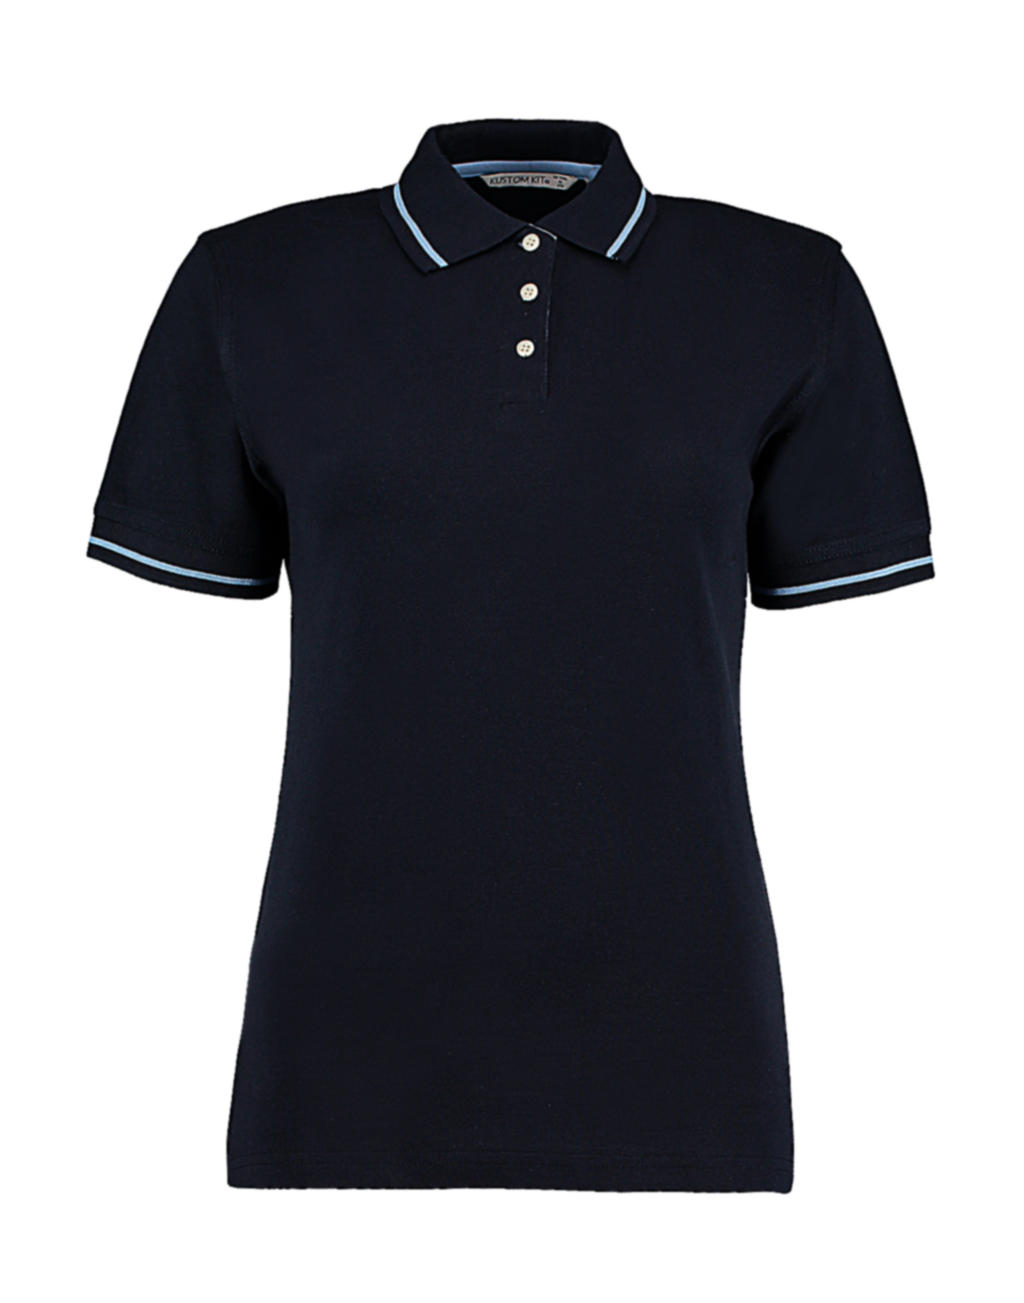  Womens St. Mellion Polo in Farbe Navy/Light Blue